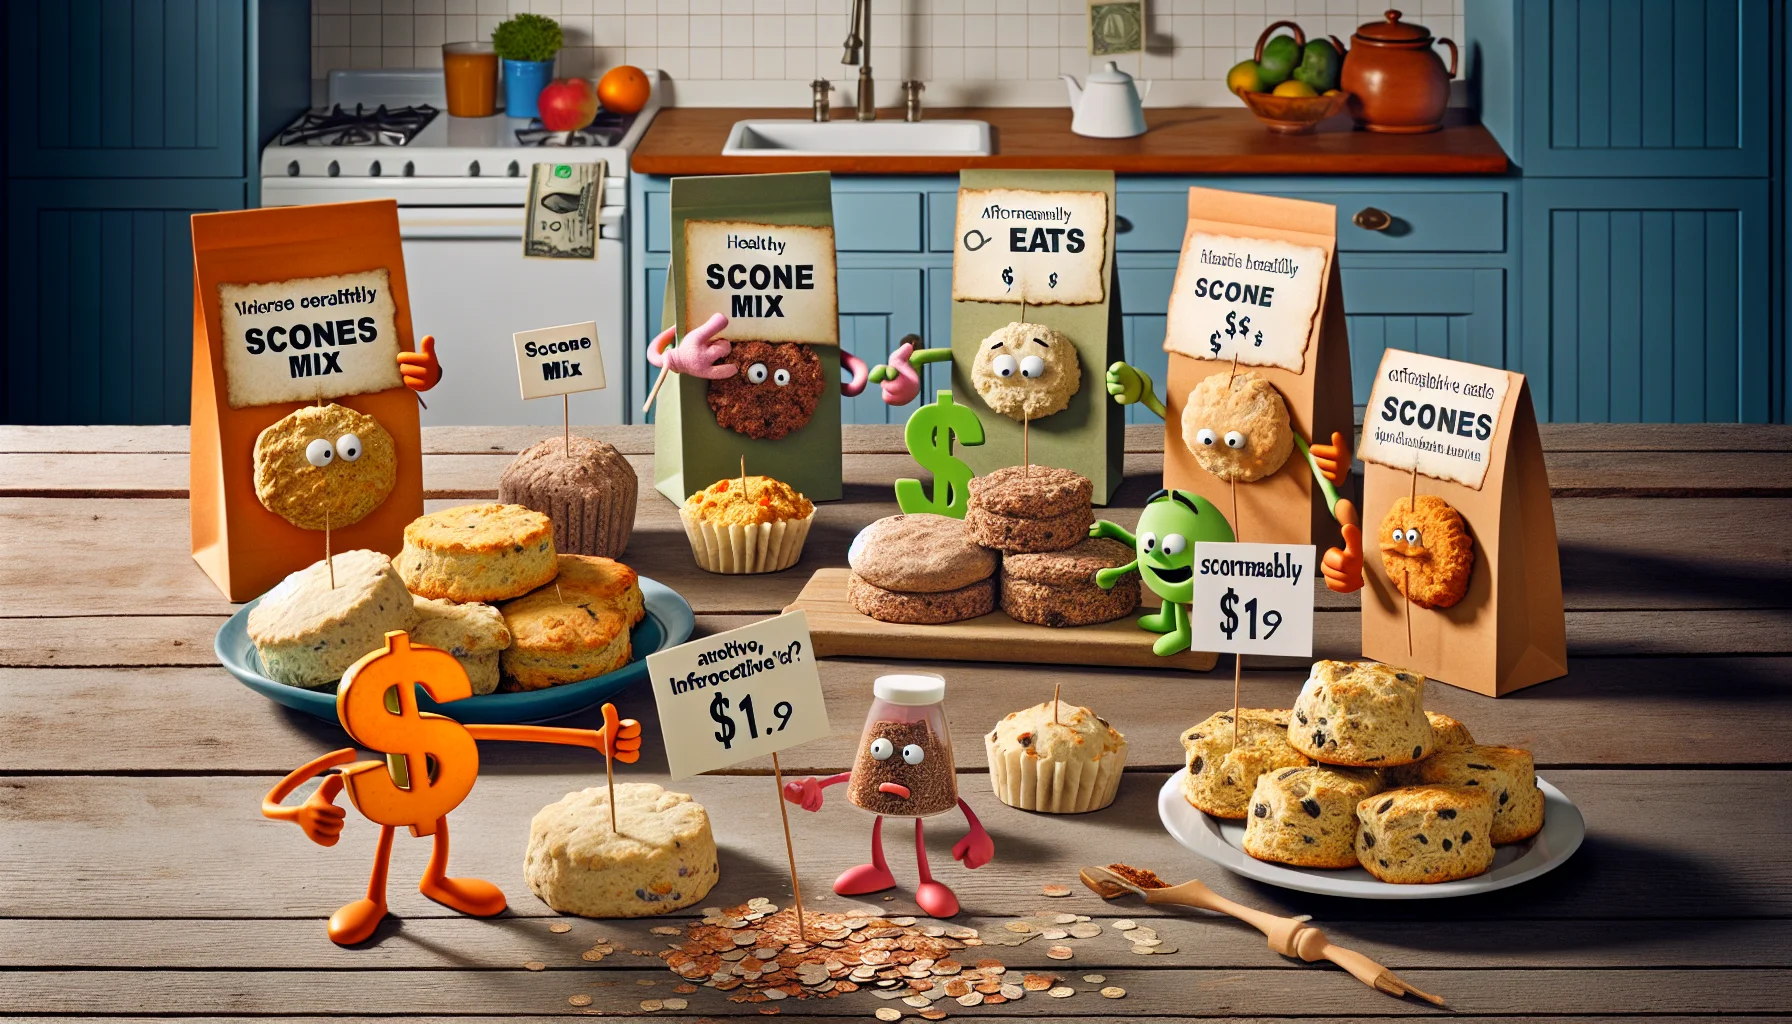 Humorous scene in a home kitchen displaying different options for scone mix gift ideas. A variety of healthy, inexpensively prepared scones made with alternative ingredients like whole wheat, oats, and flax seeds are arranged creatively on a rustic wooden table. A well-designed price tag attached to each suggests the affordable nature of these mixes. A sprinkle of light-hearted elements like animated dollar bills attempting to grab a bite of the scones and ‘penny’ characters showing thumbs-up signs contribute to the funny scenario, aimed at encouraging economical and health-conscious eating.